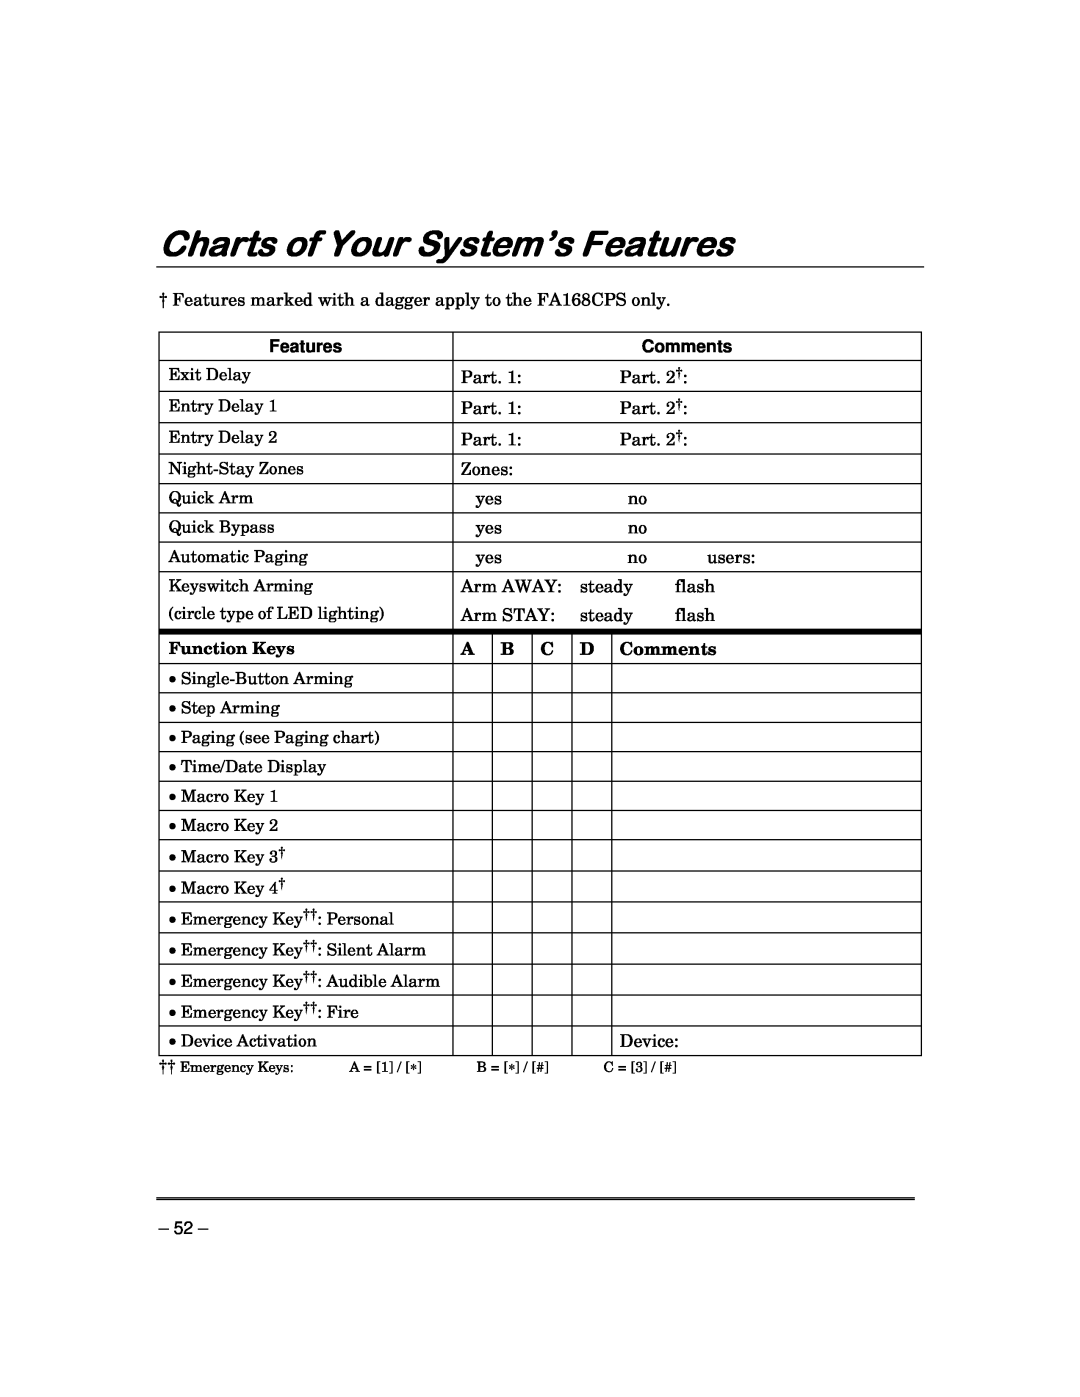 Garmin FA168CPS manual Charts of Your System’s Features, Comments 